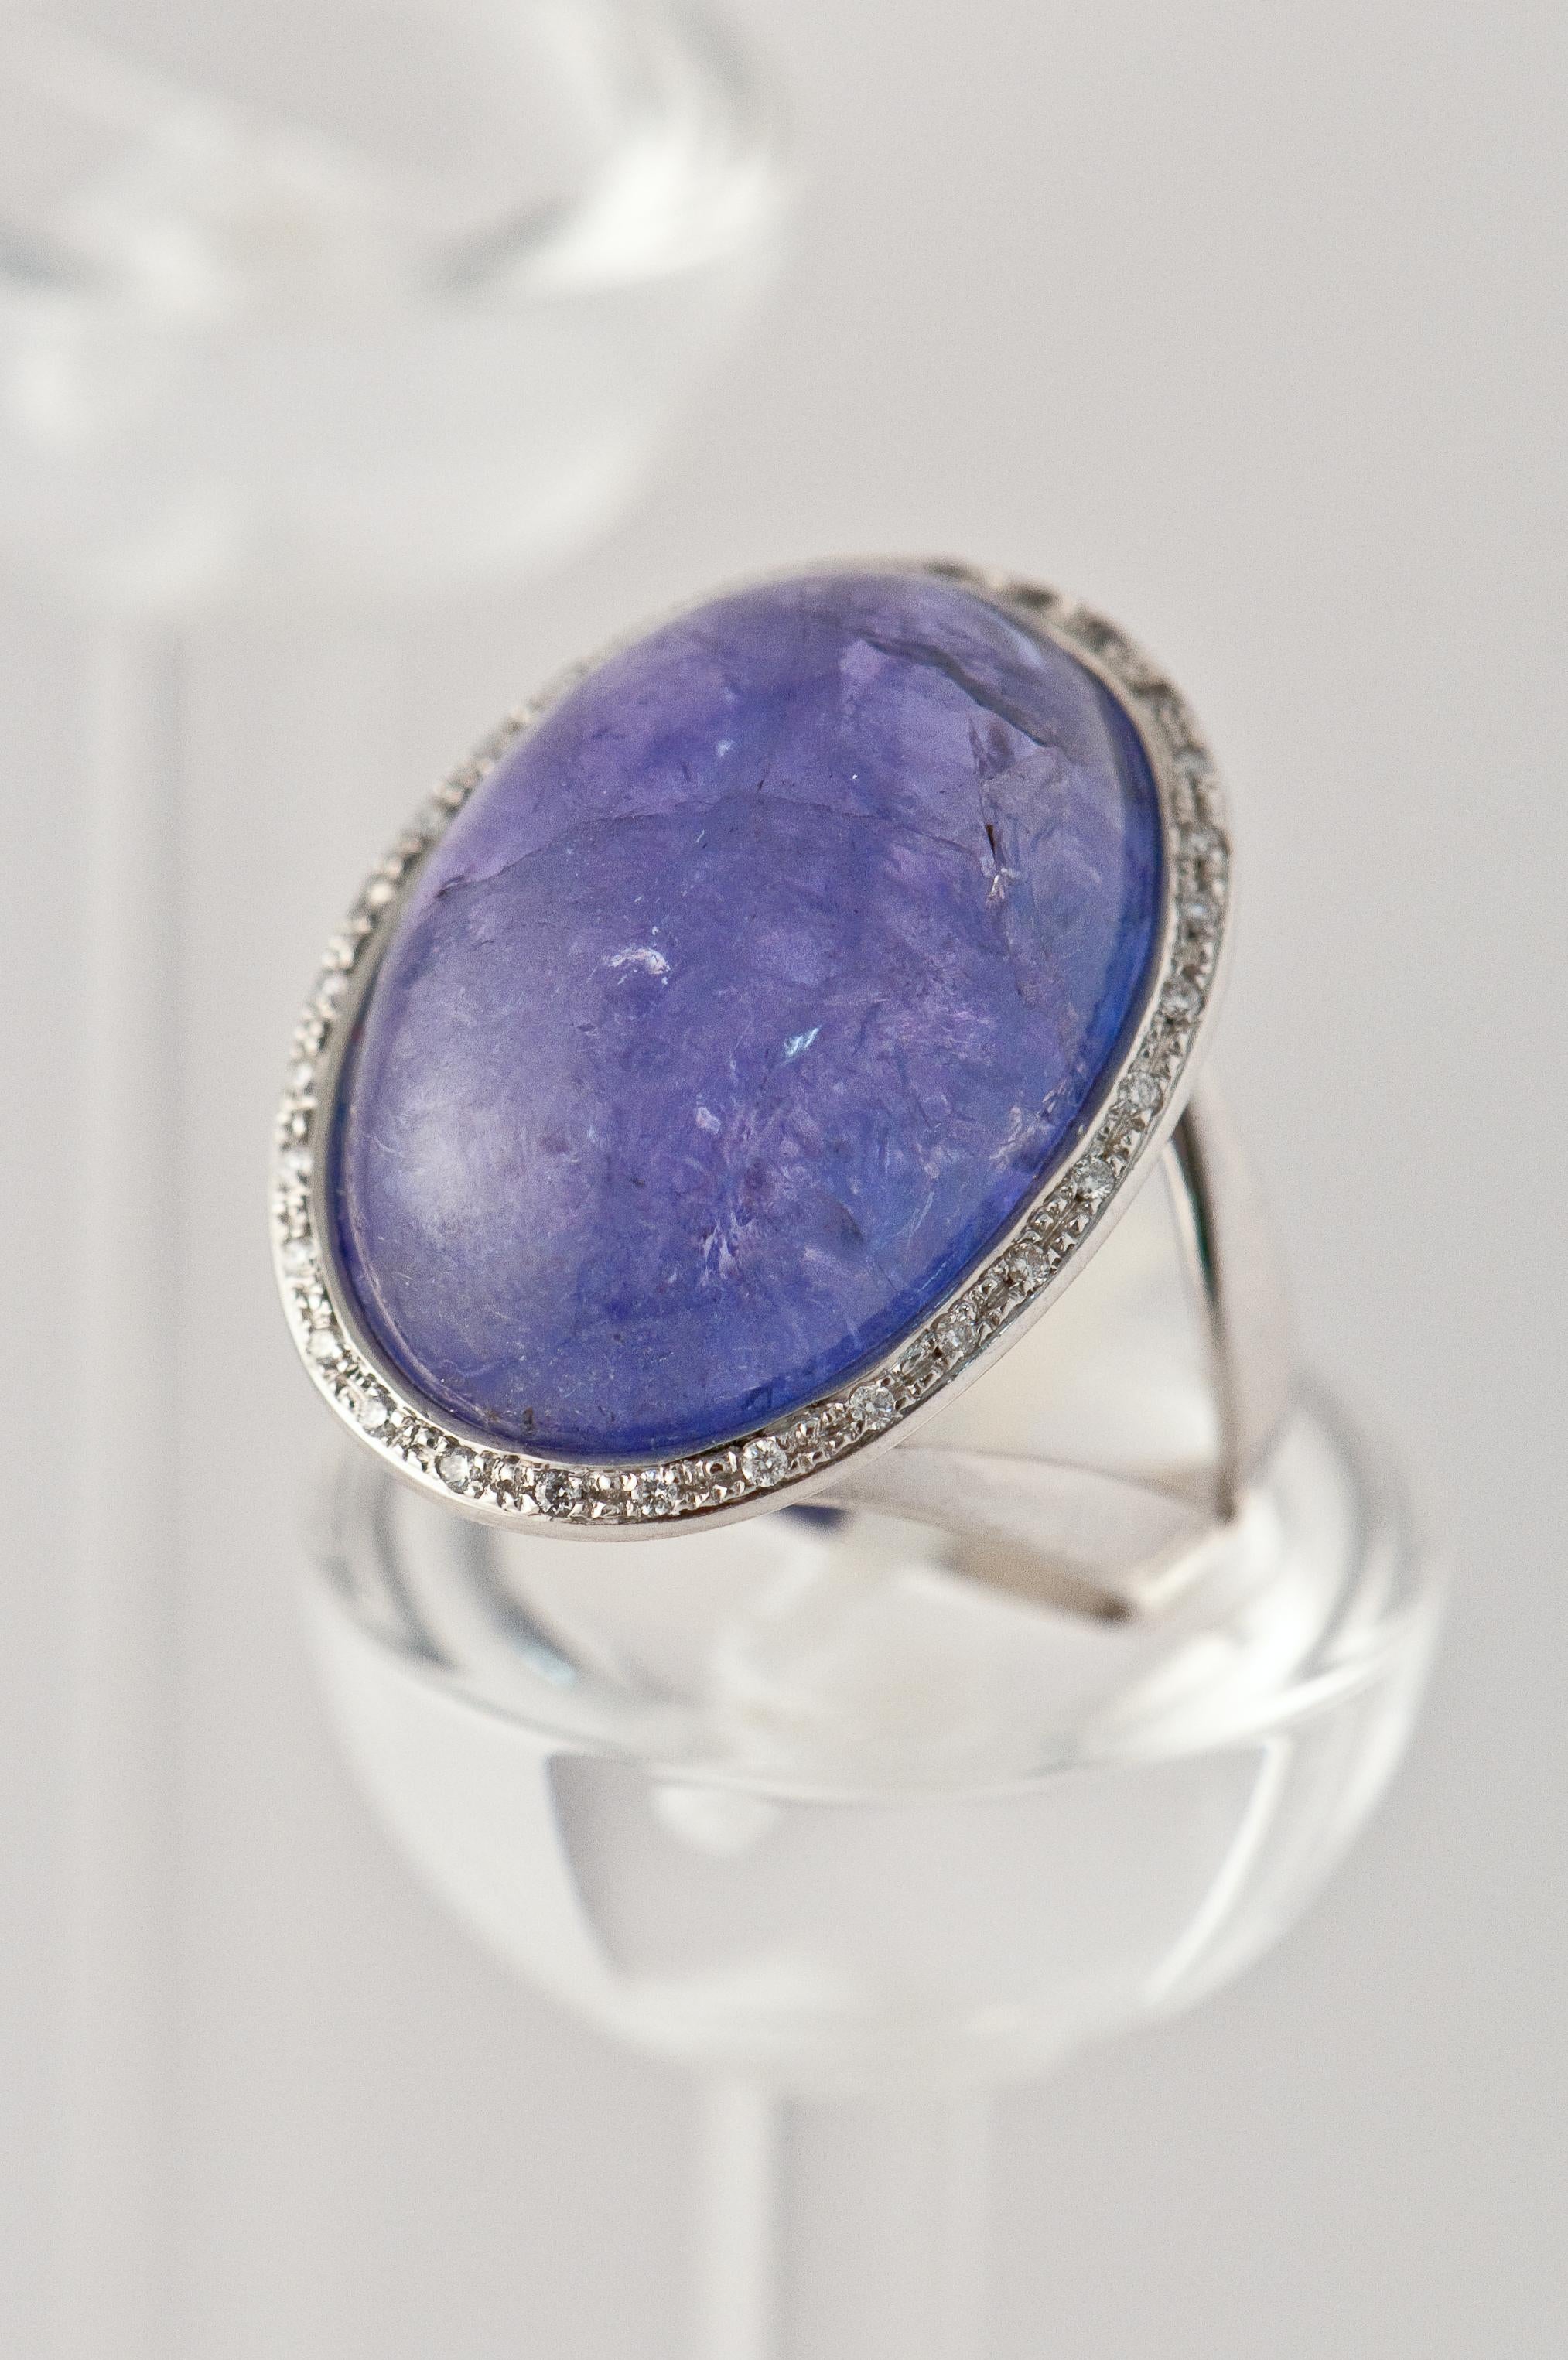 Contemporary White Gold Ring with Tanzanite, Ornamented with Diamonds